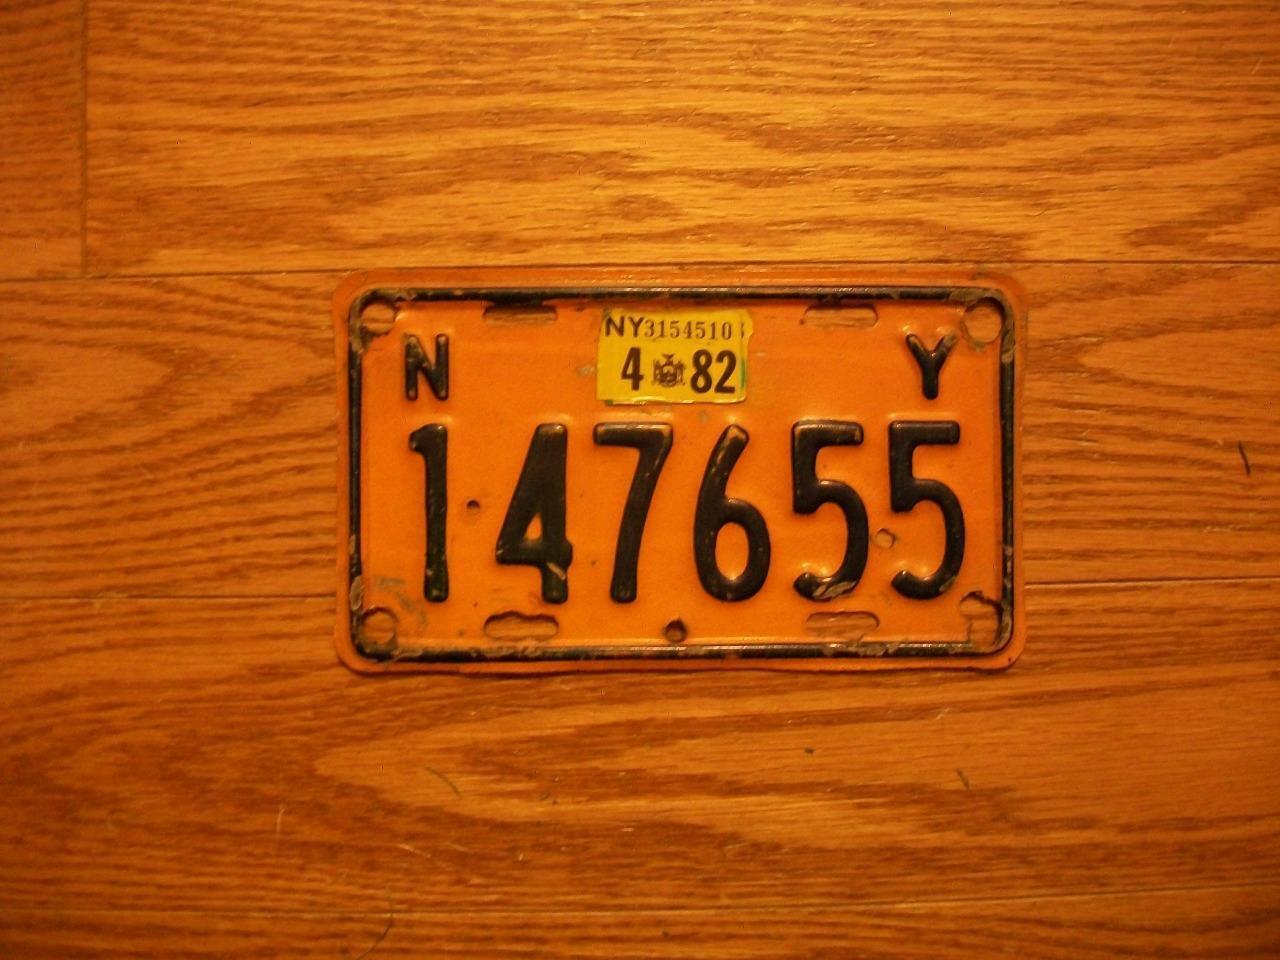 SINGLE NEW YORK LICENSE PLATE - 1982 - 147655 - MOTORCYCLE